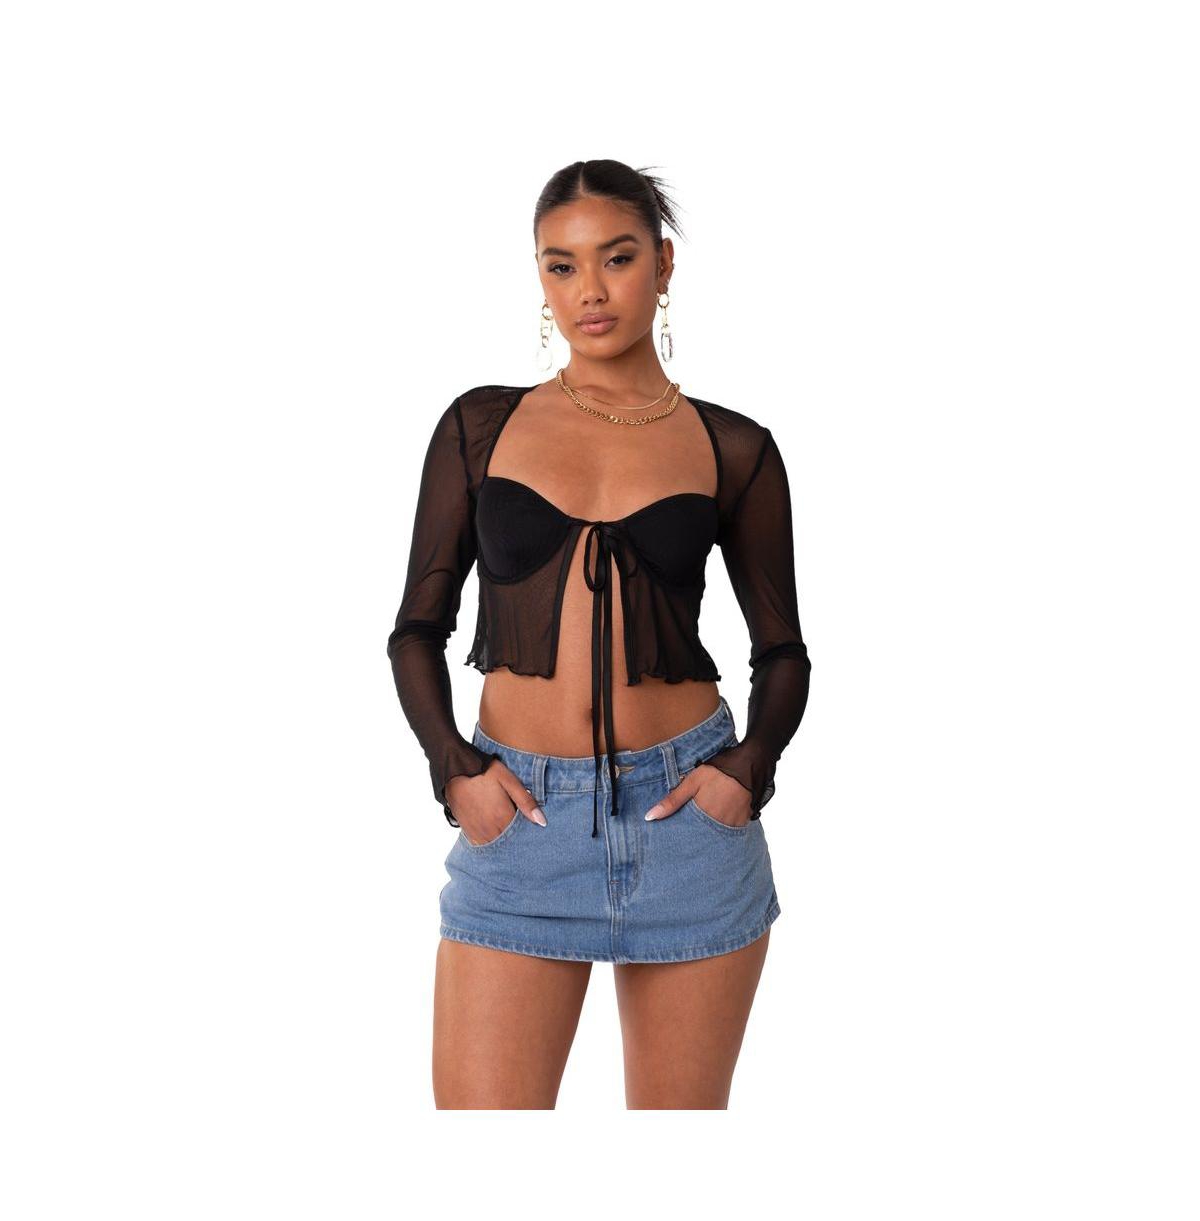 Women's Long Sleeve Mesh Top With Cups & Tie At Front - Black